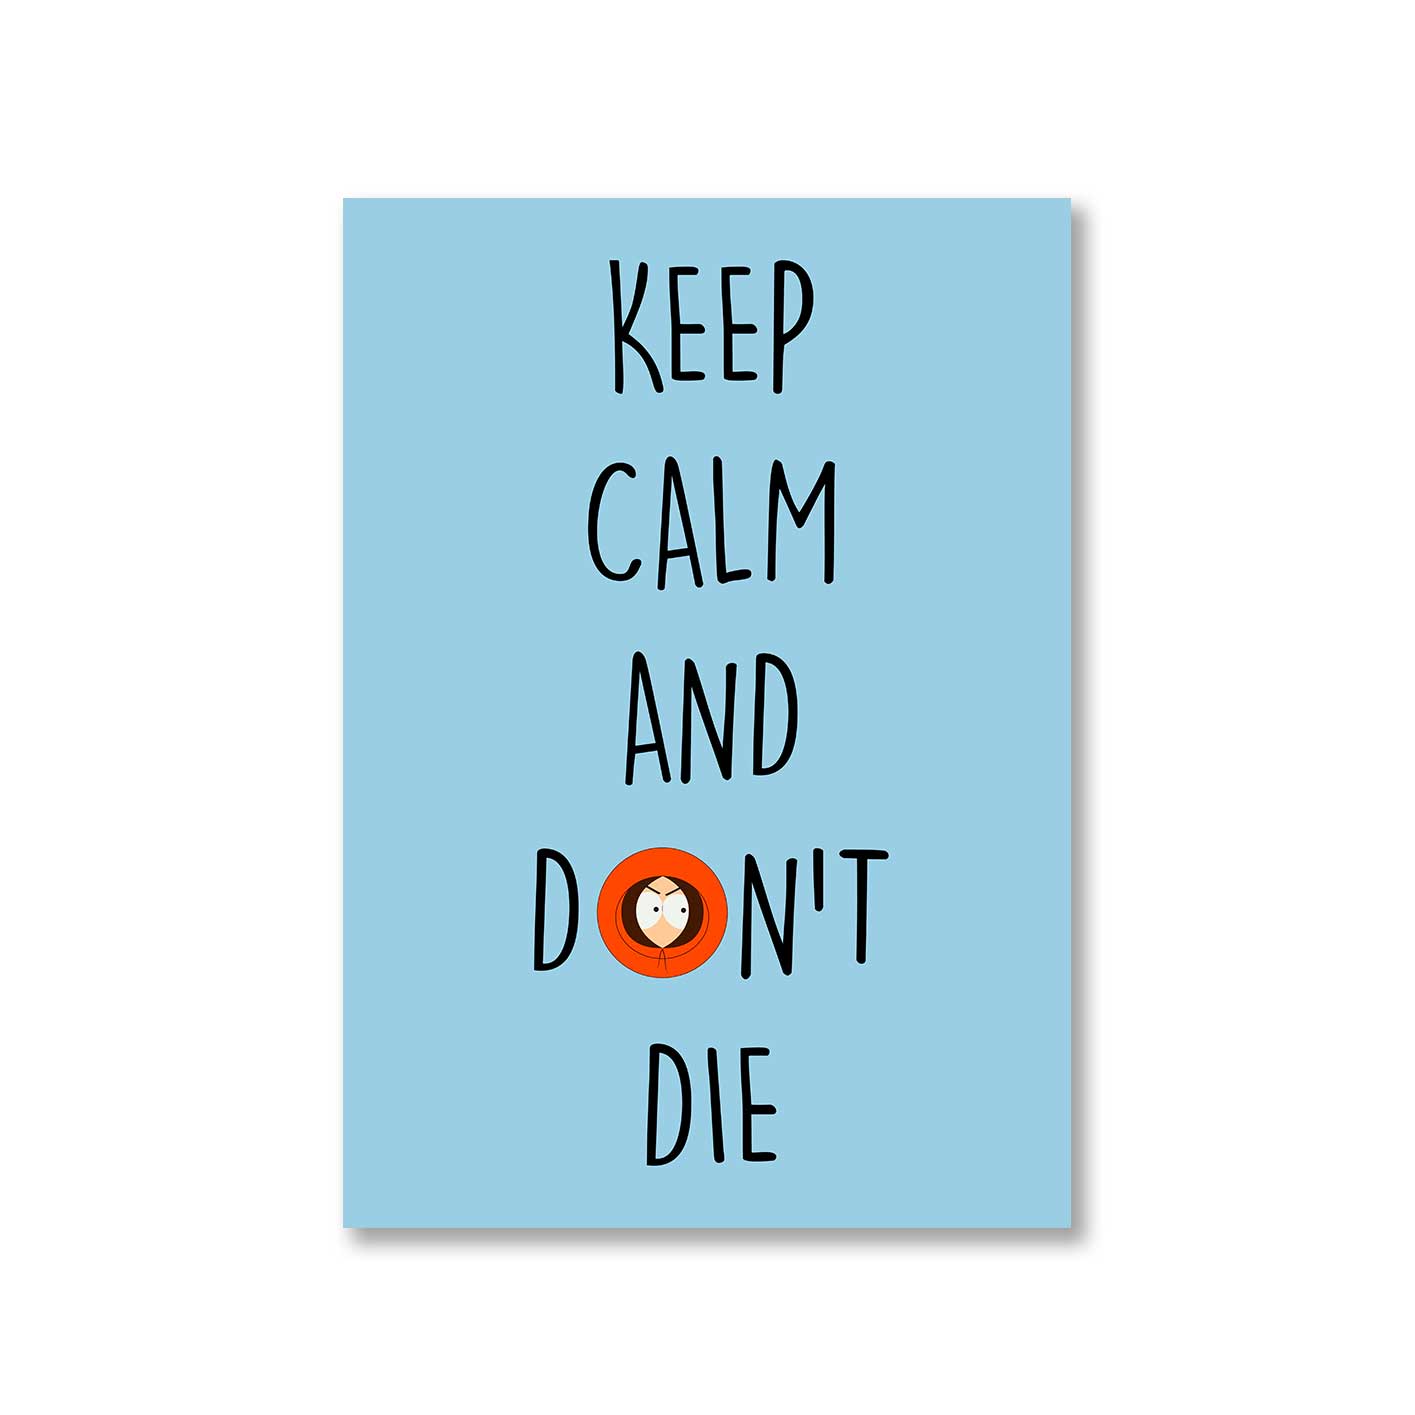 south park keep calm & don't die poster wall art buy online united states of america usa the banyan tee tbt a4 south park kenny cartman stan kyle cartoon character illustration keep calm